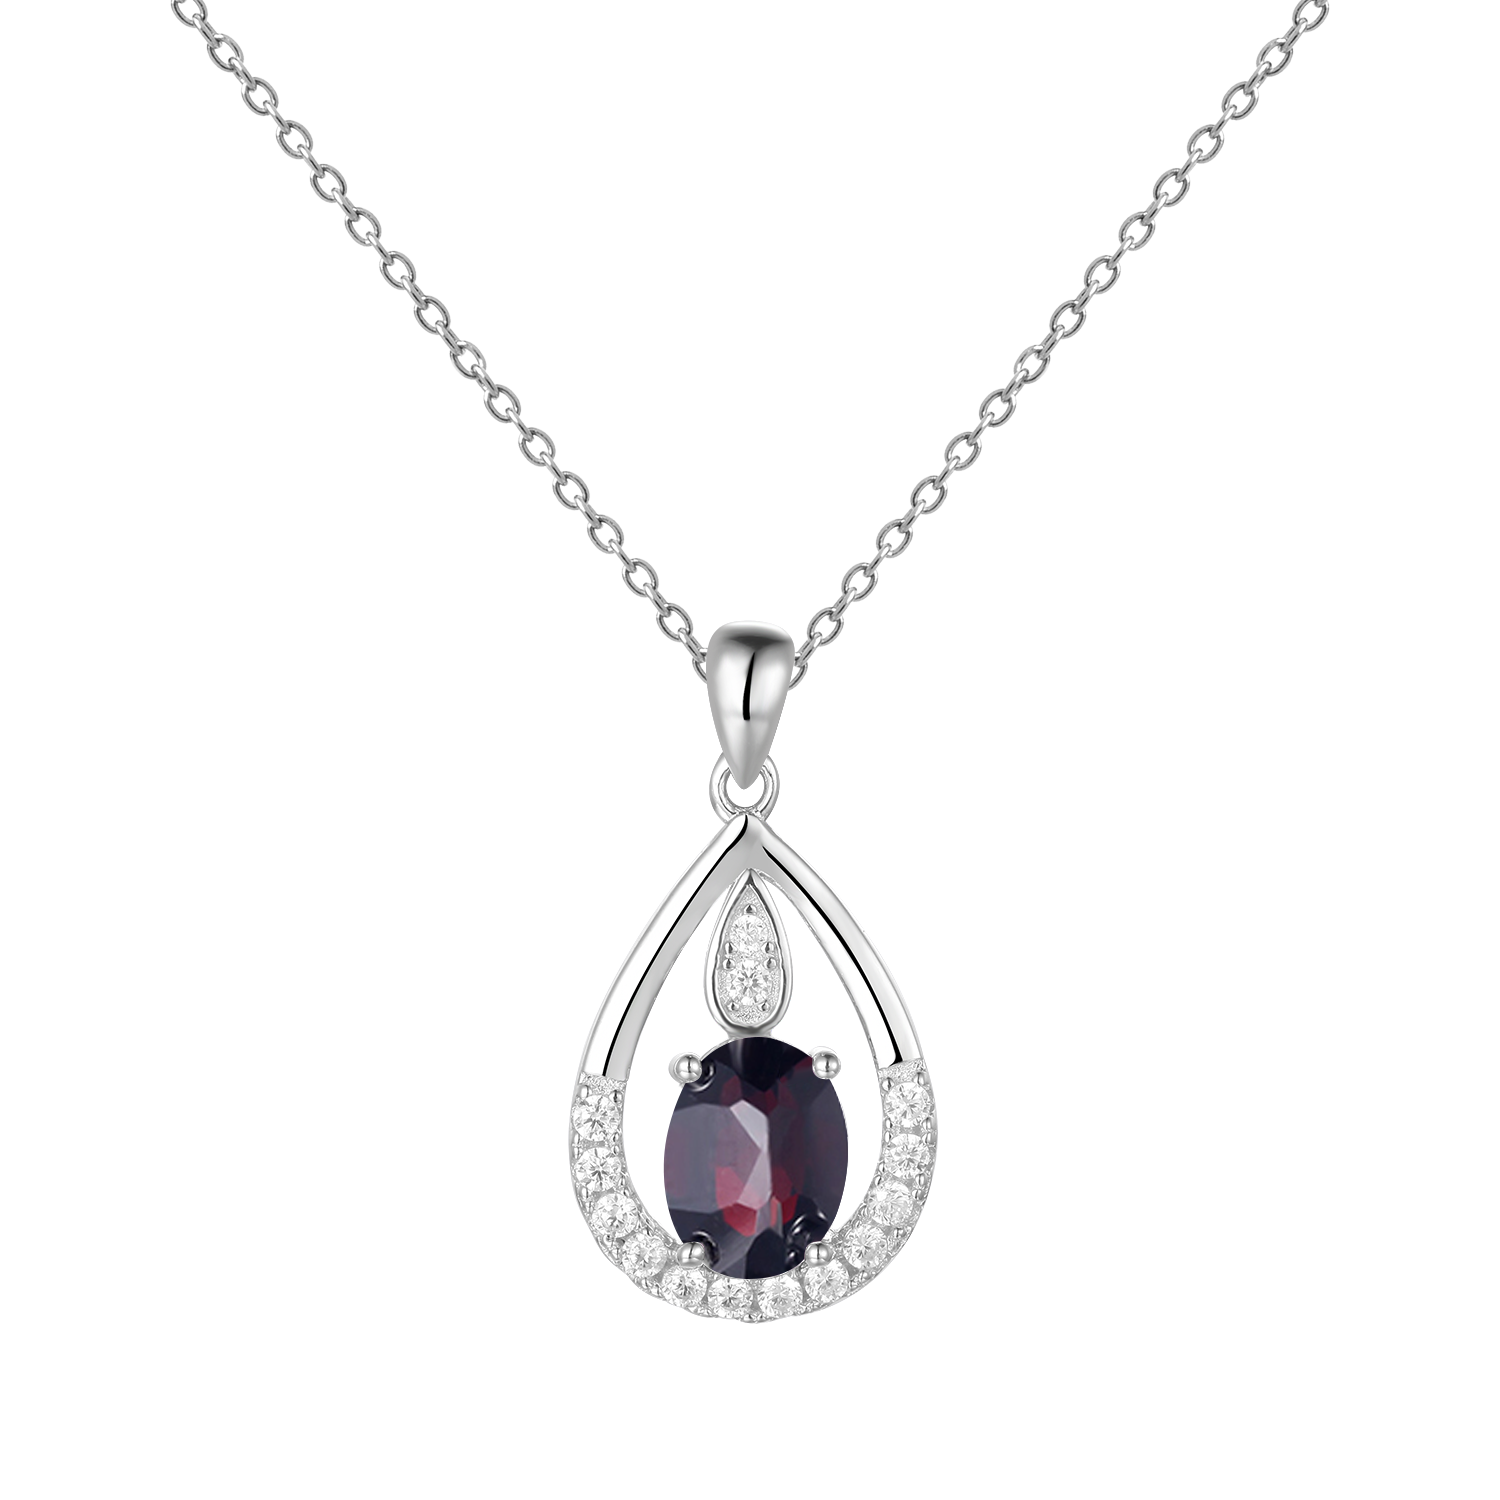 Gem&#39;s Ballet December Birthstone Topaz Necklace 6x8mm Oval Pink Topaz Pendant Necklace in 925 Sterling Silver with 18&quot; Chain Black Garnet